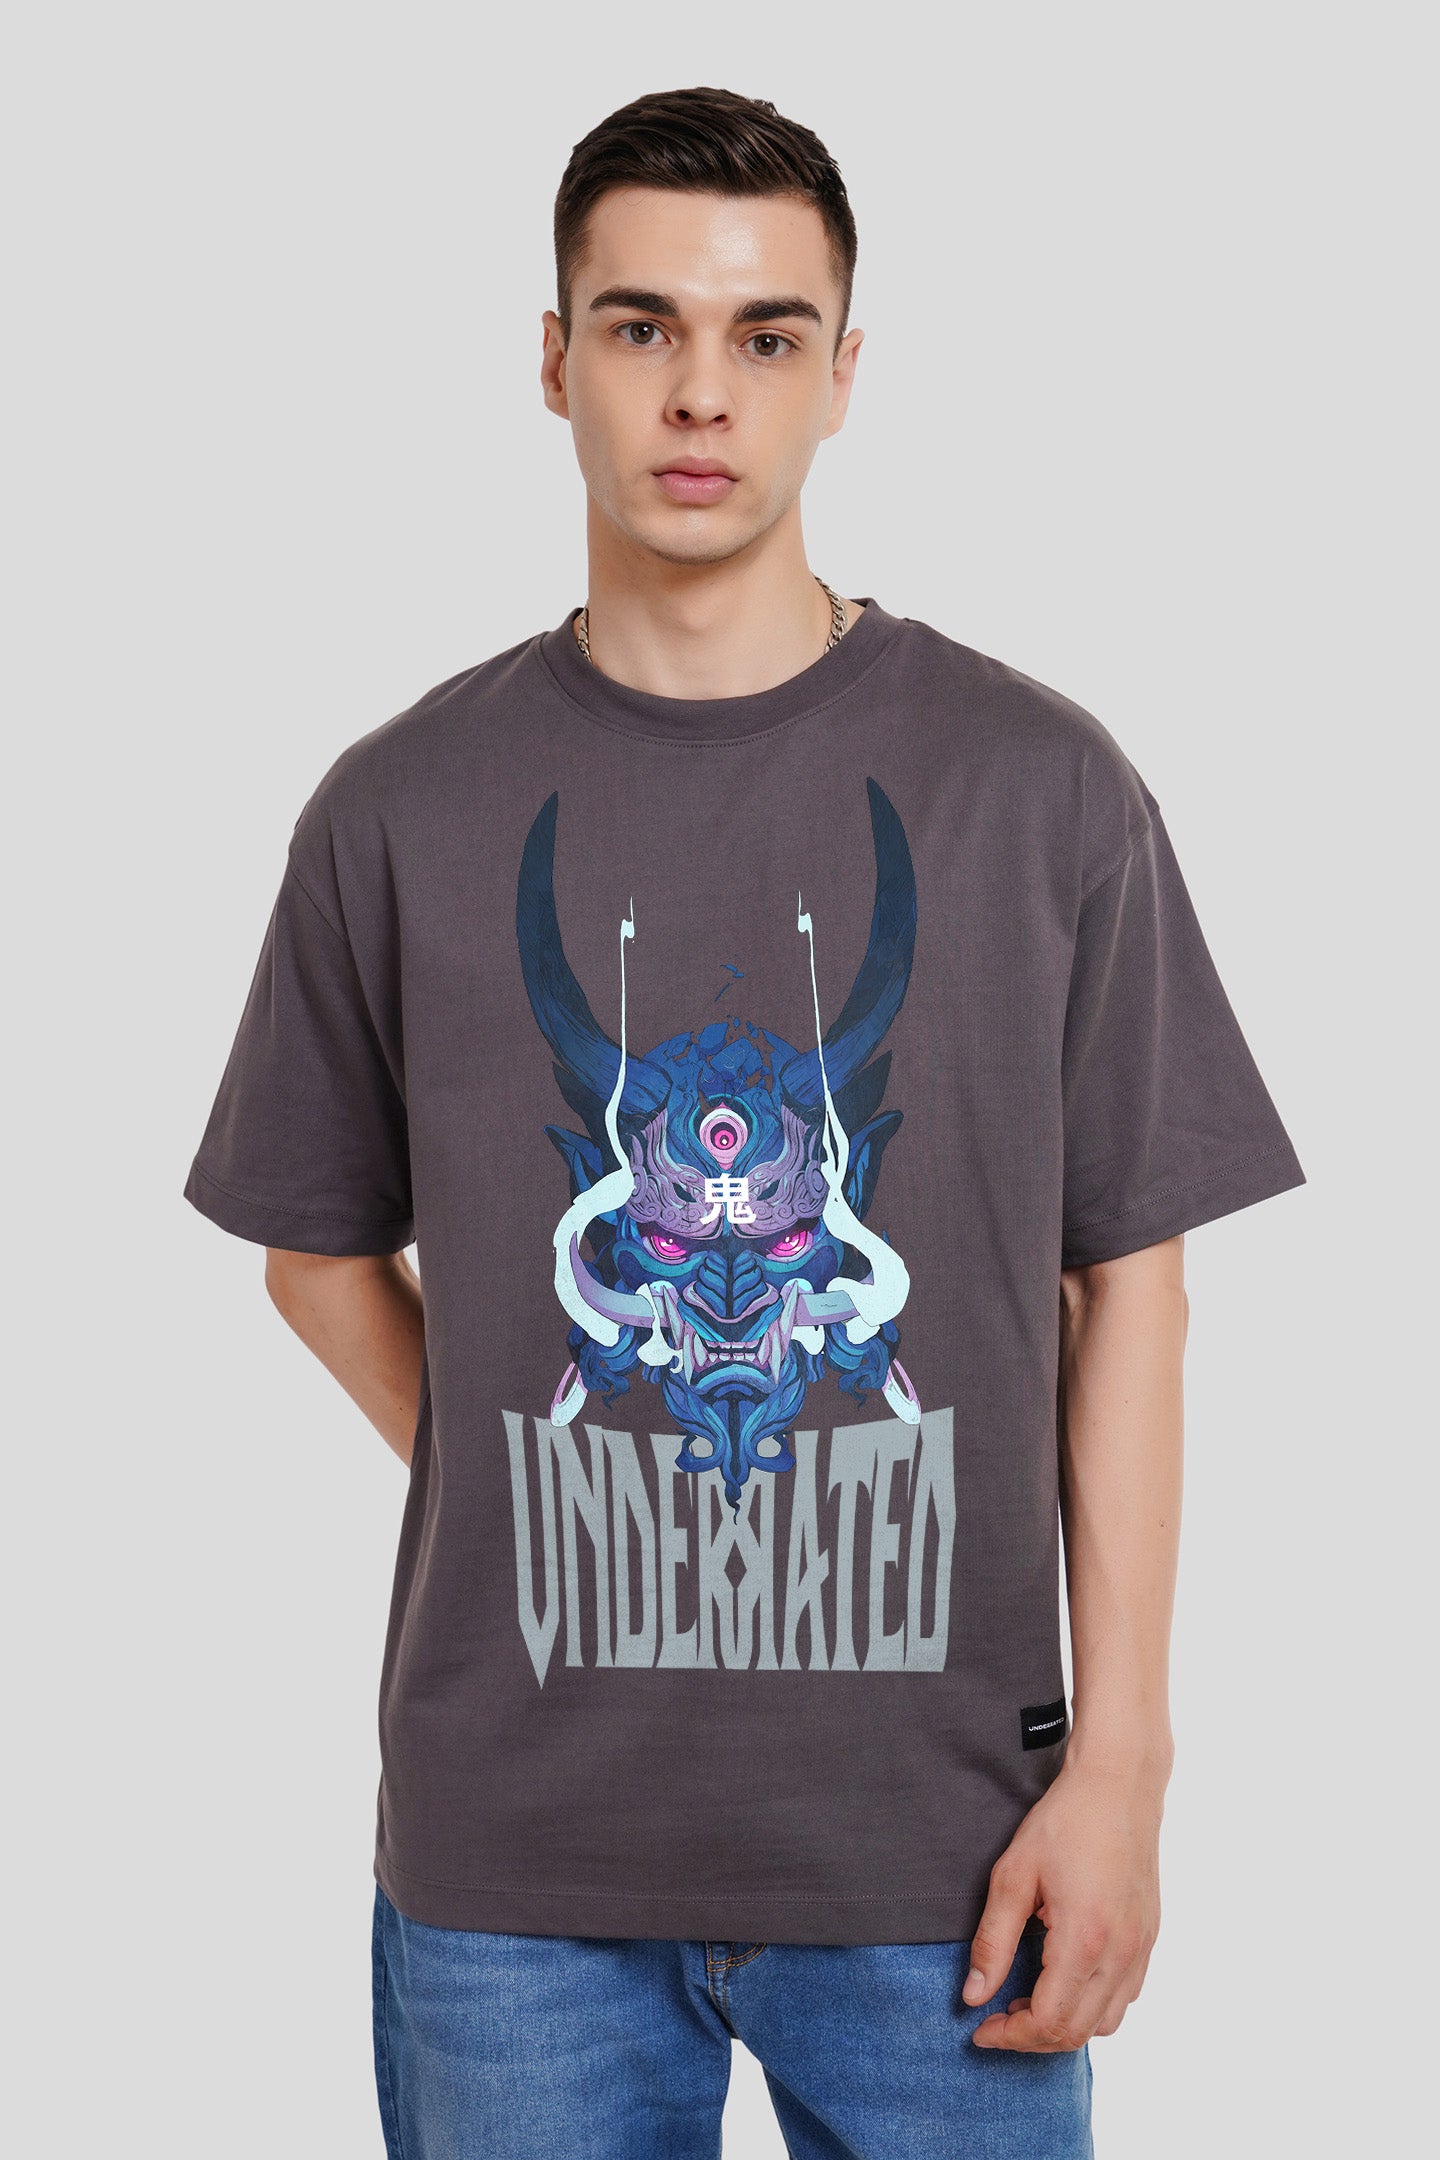 Samurai Vendetta Dark Grey Printed T Shirt Men Oversized Fit With Front And Back Design Pic 1